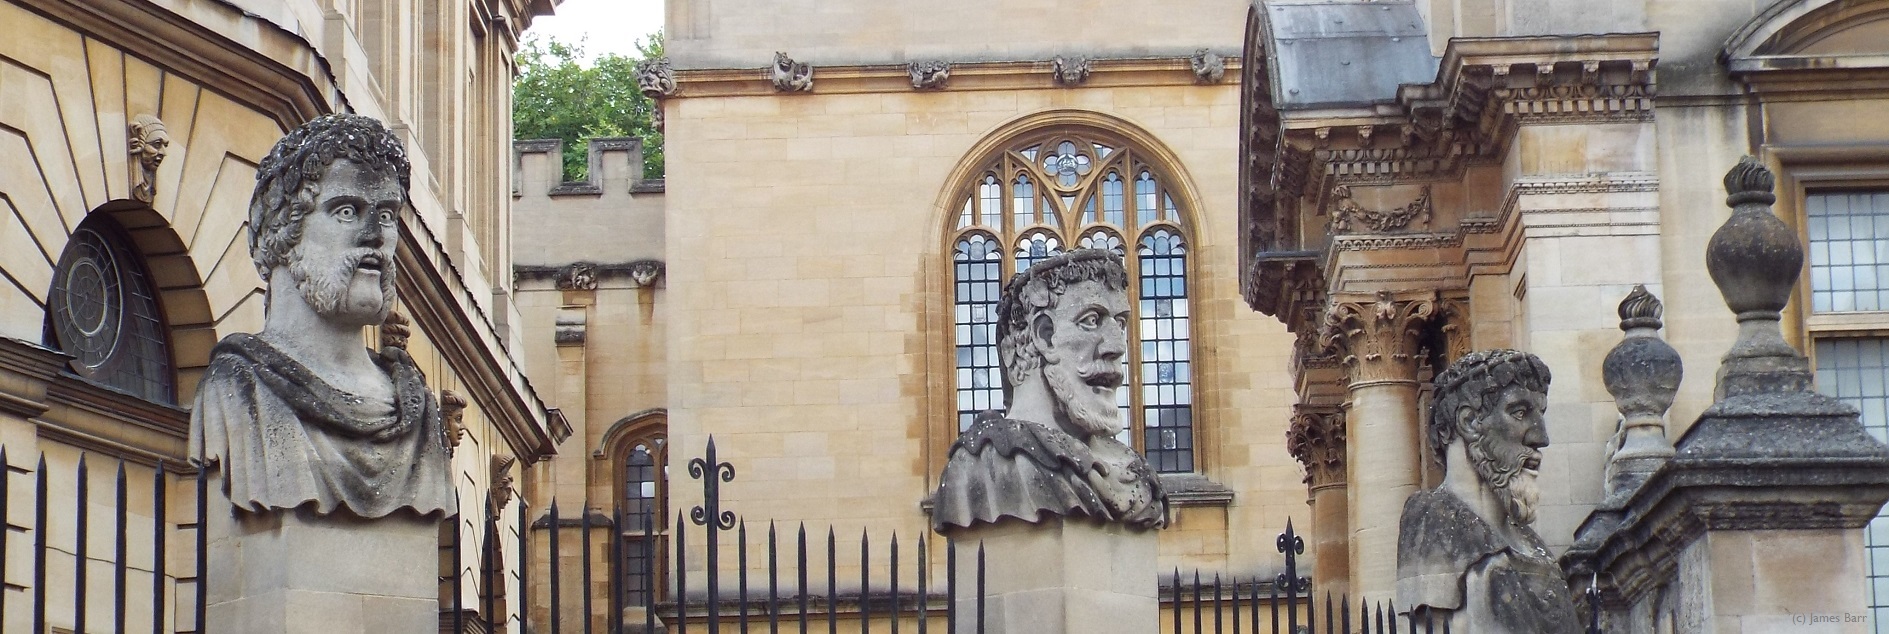 Image of Statues in Oxford